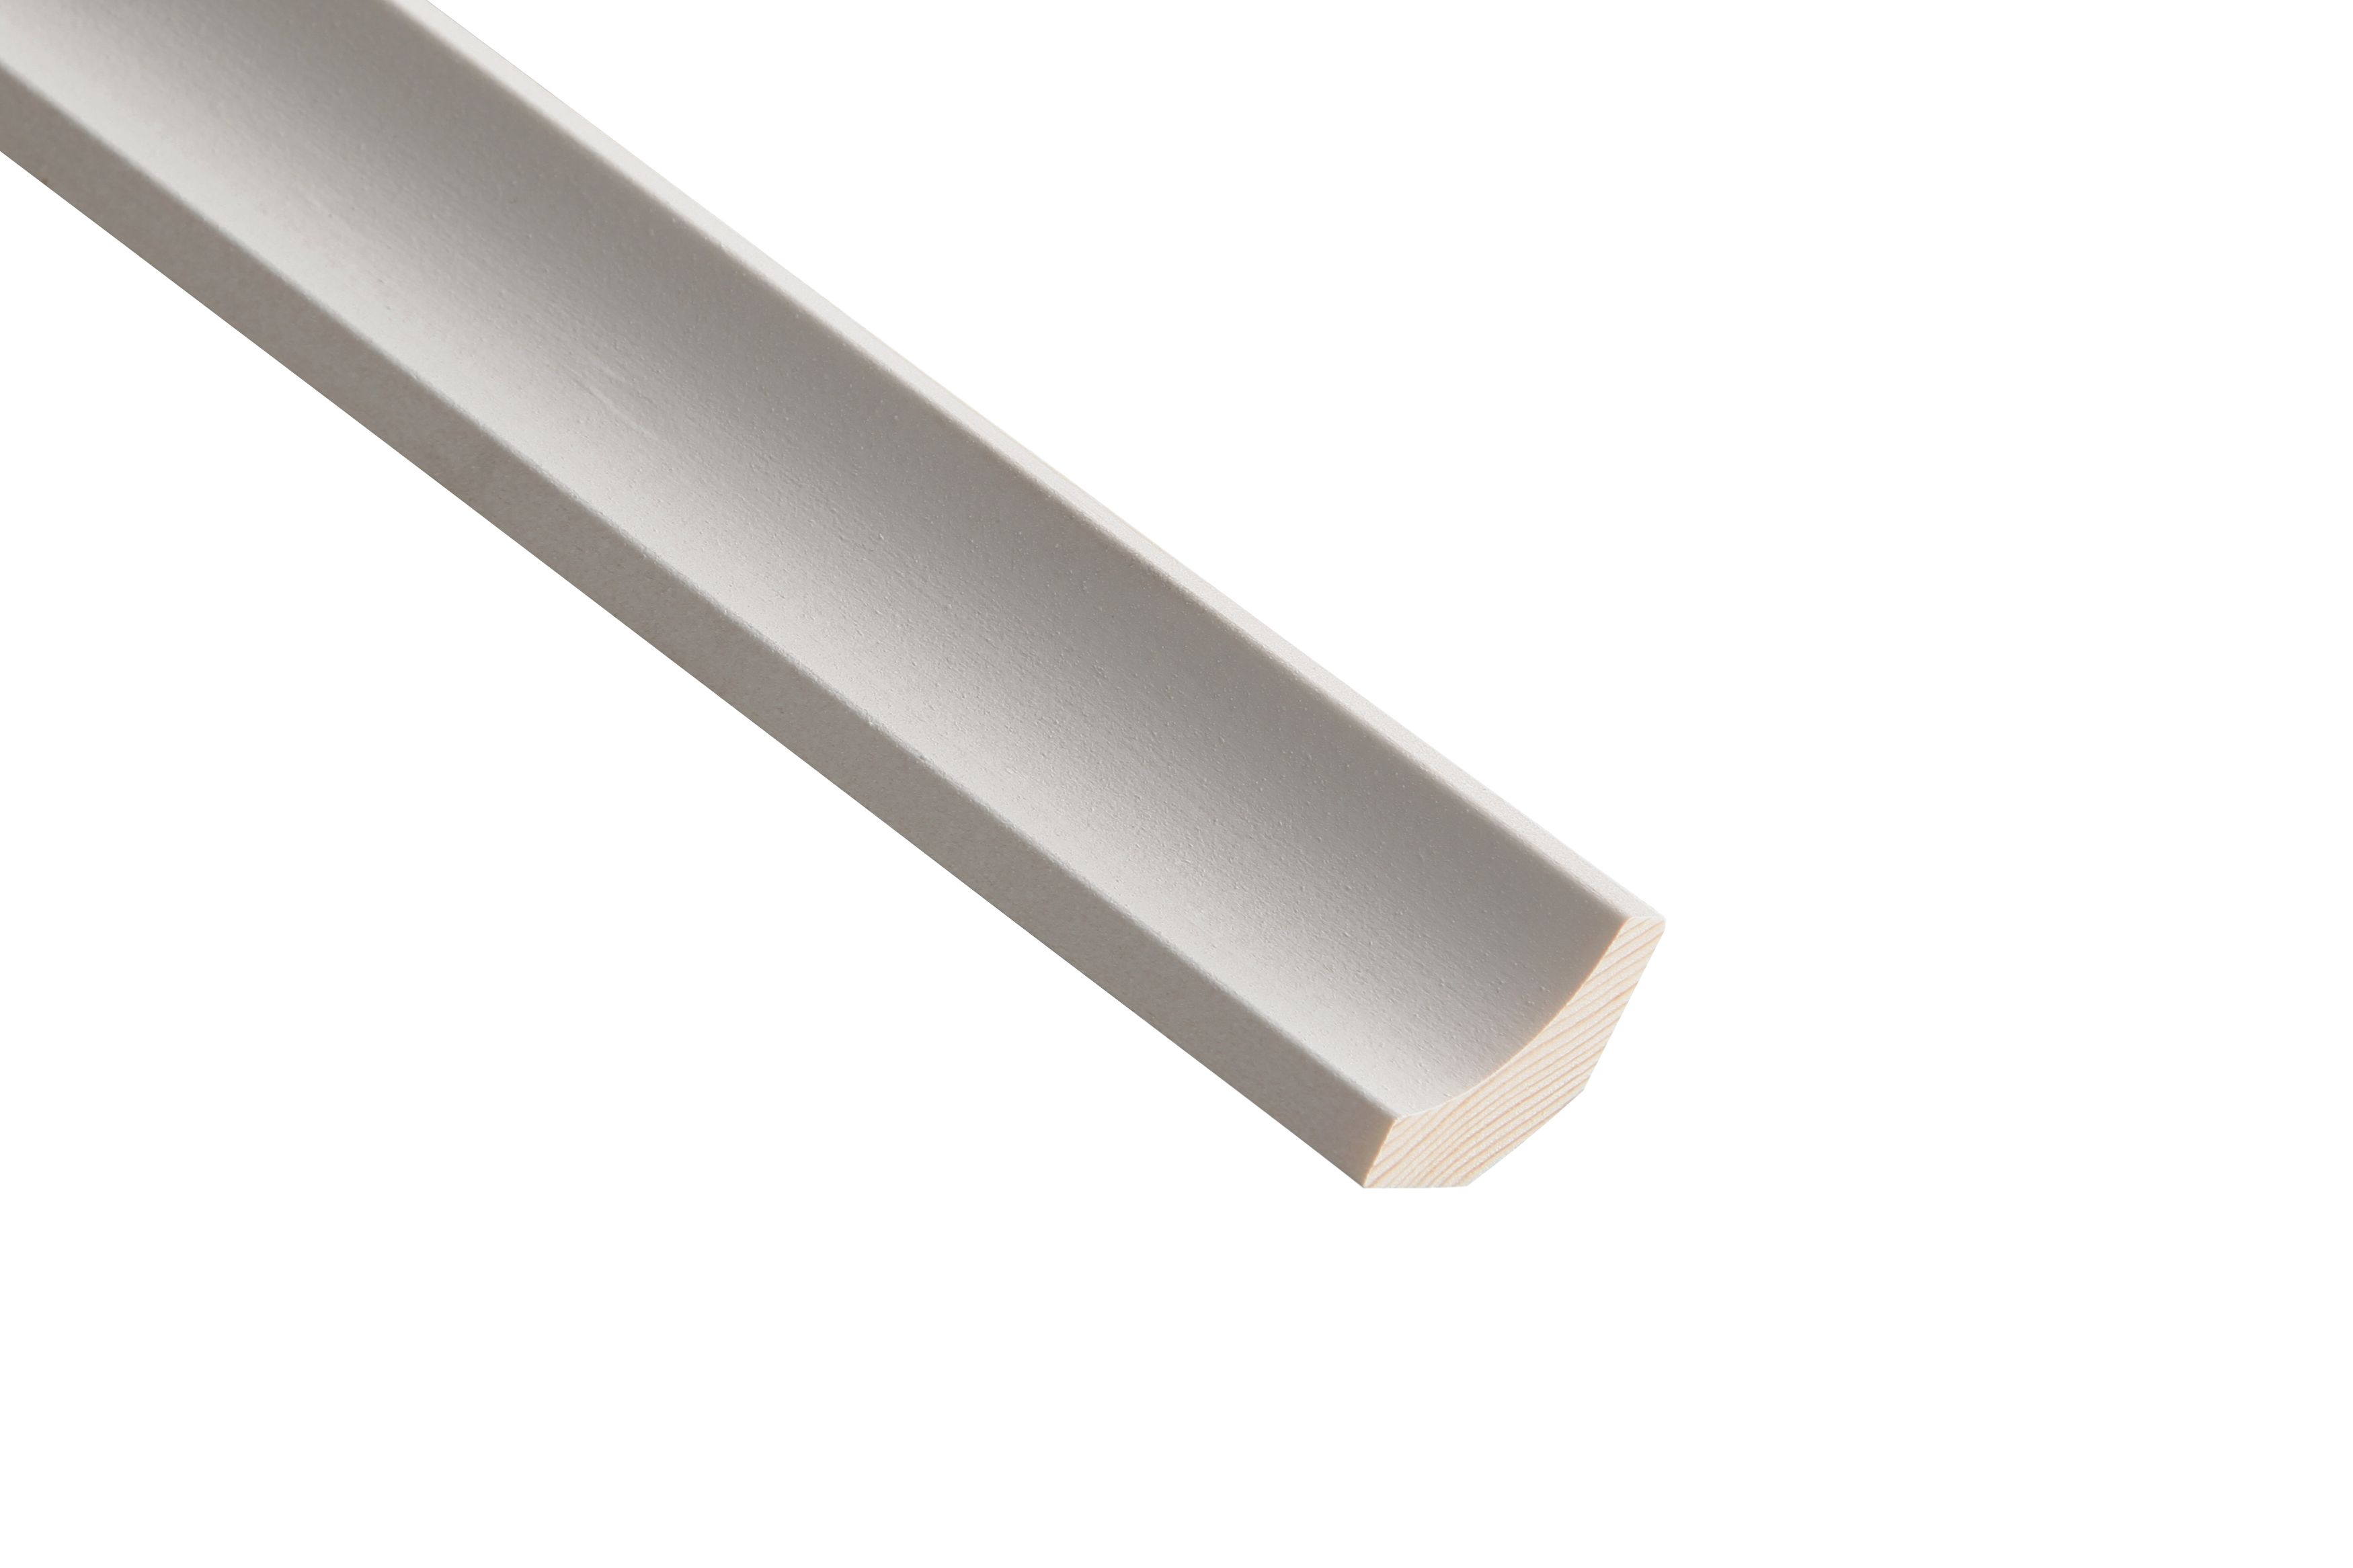 Image of Wickes Primed White Scotia Moulding - 15 x 15 x 2400mm